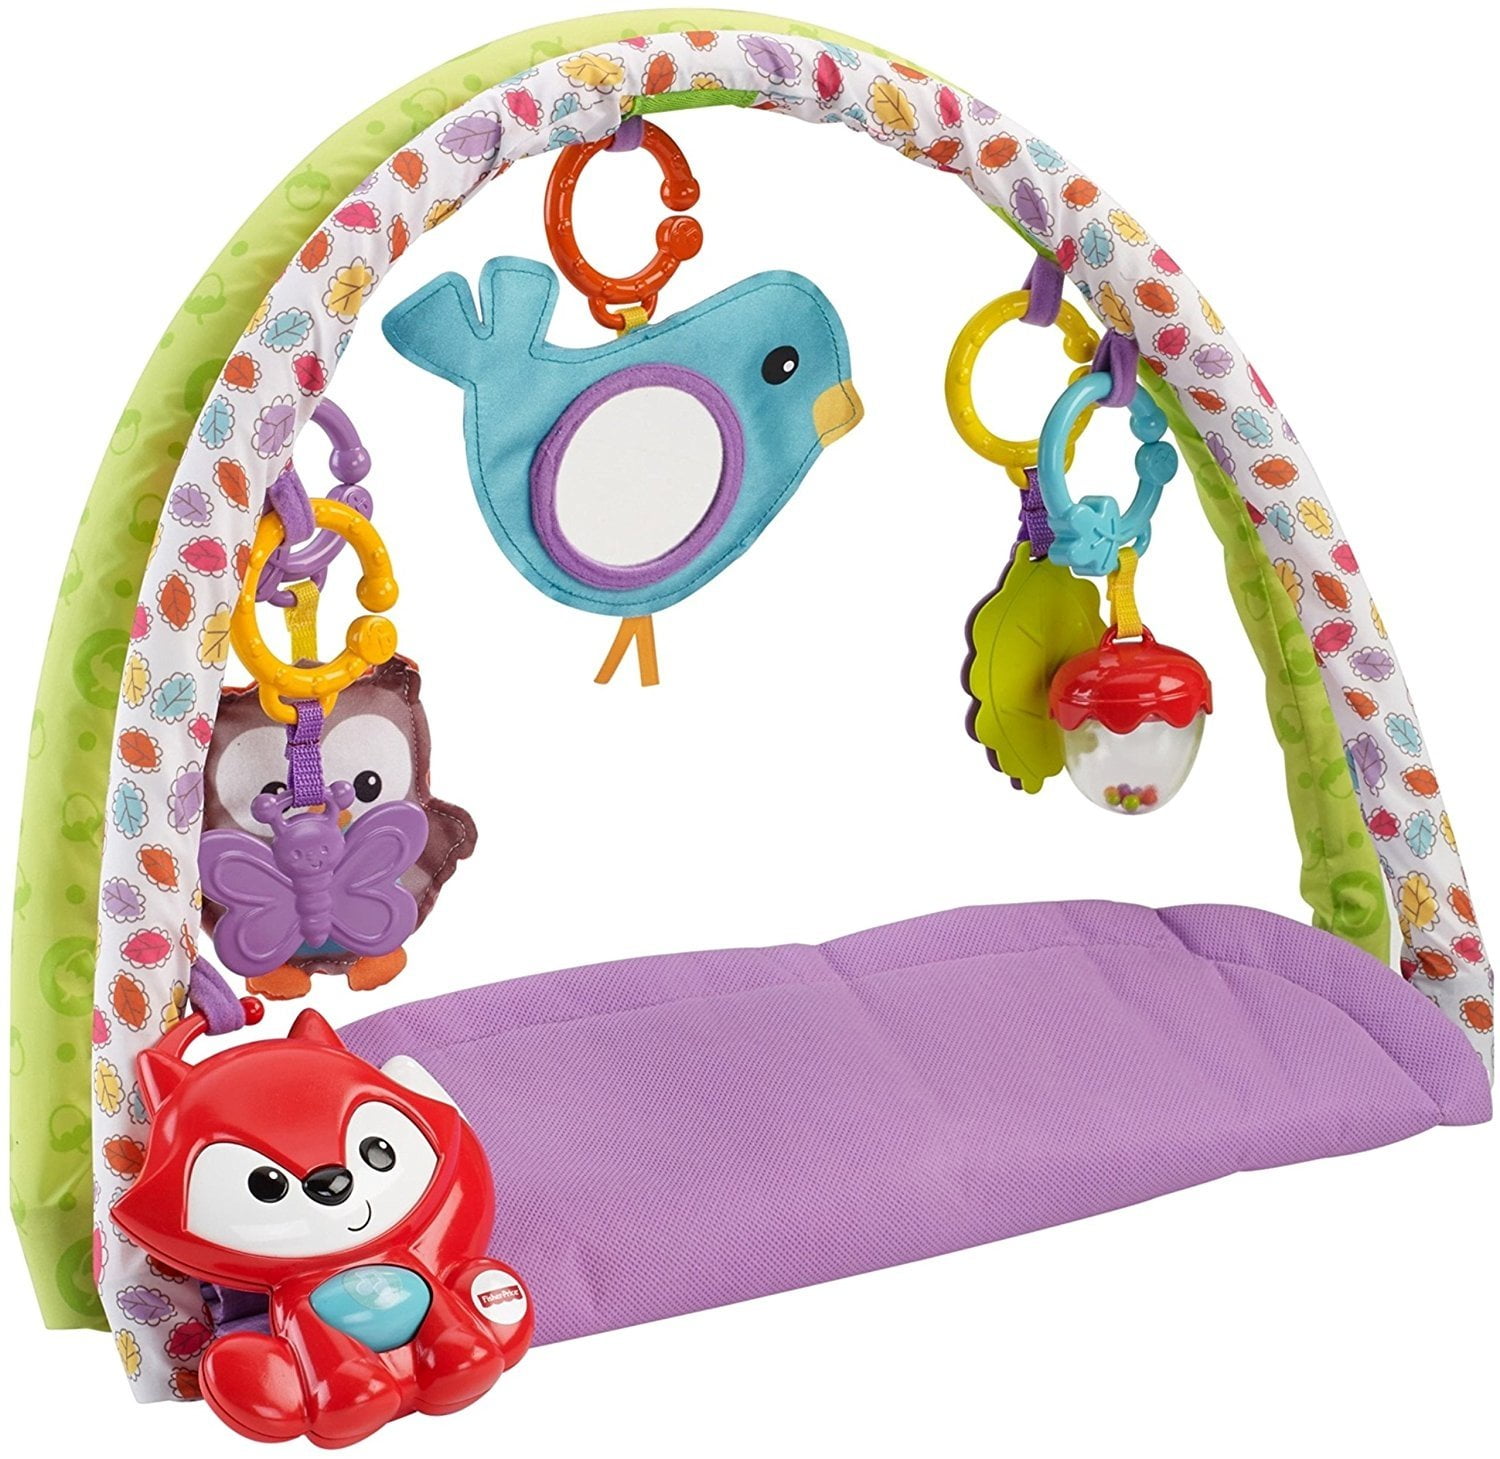 fisher price woodland friends 3 in 1 musical activity gym